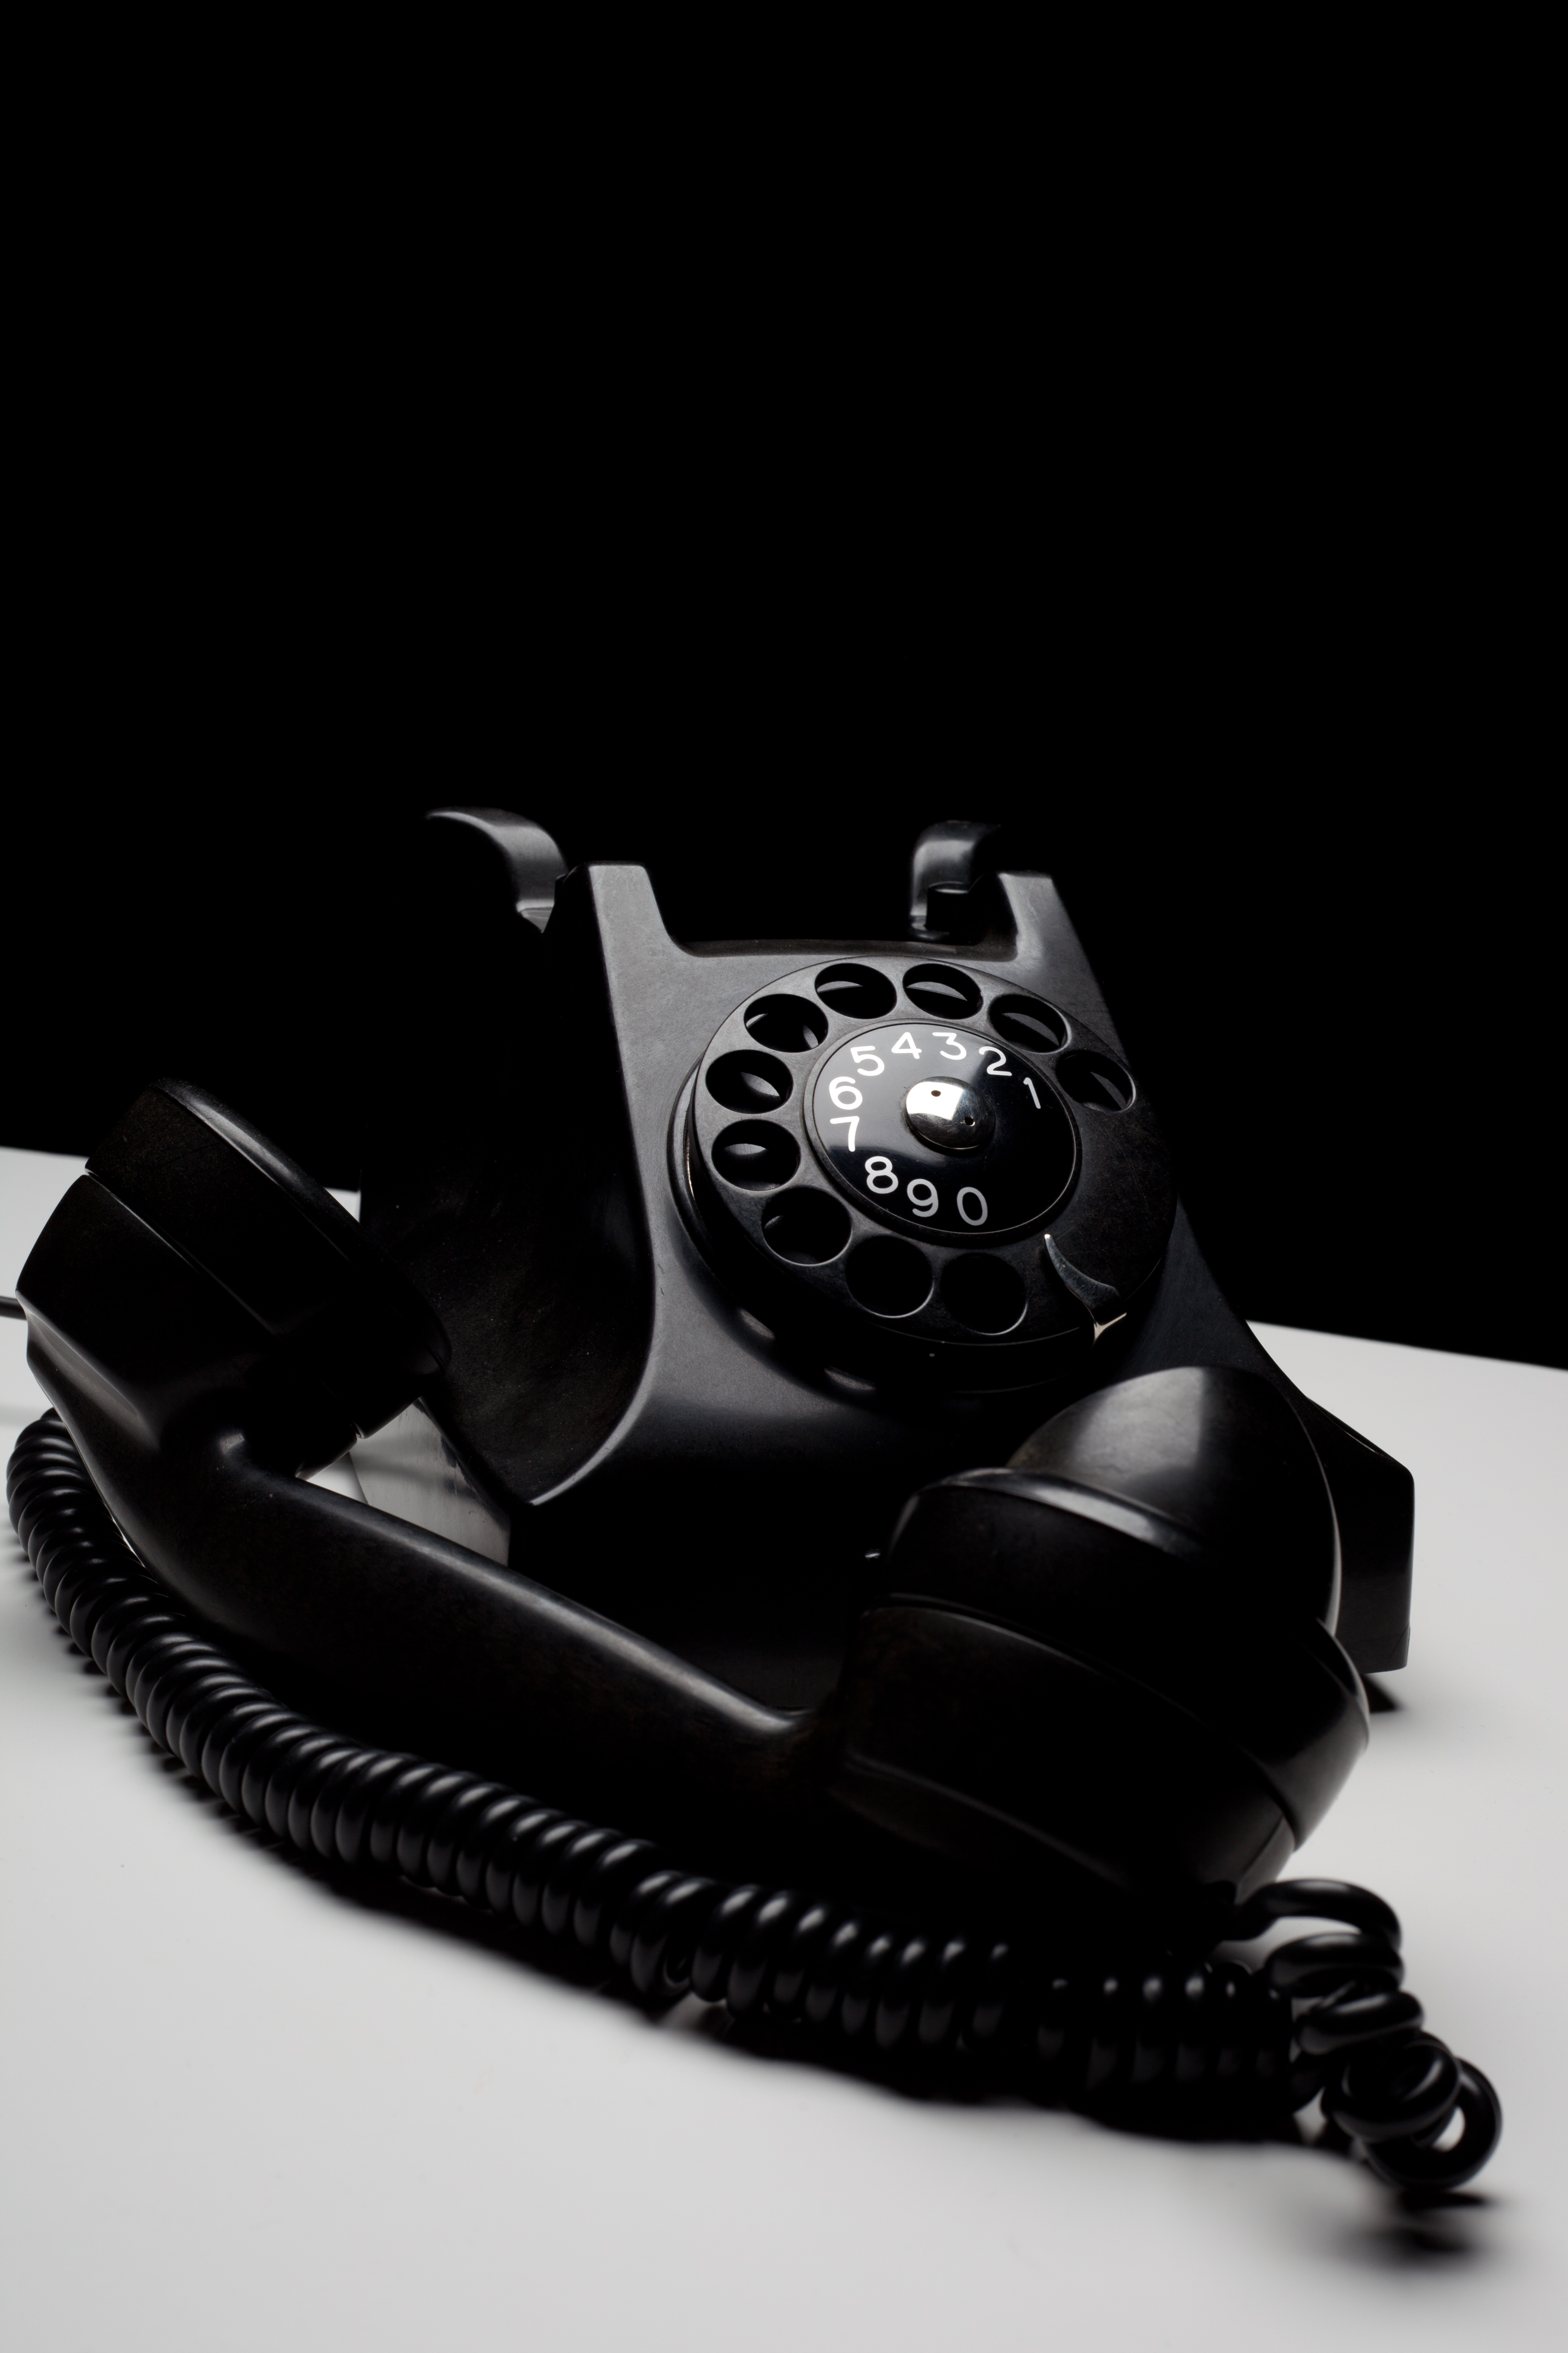 Old Telephone, Black, Call, Connect, Contact, HQ Photo